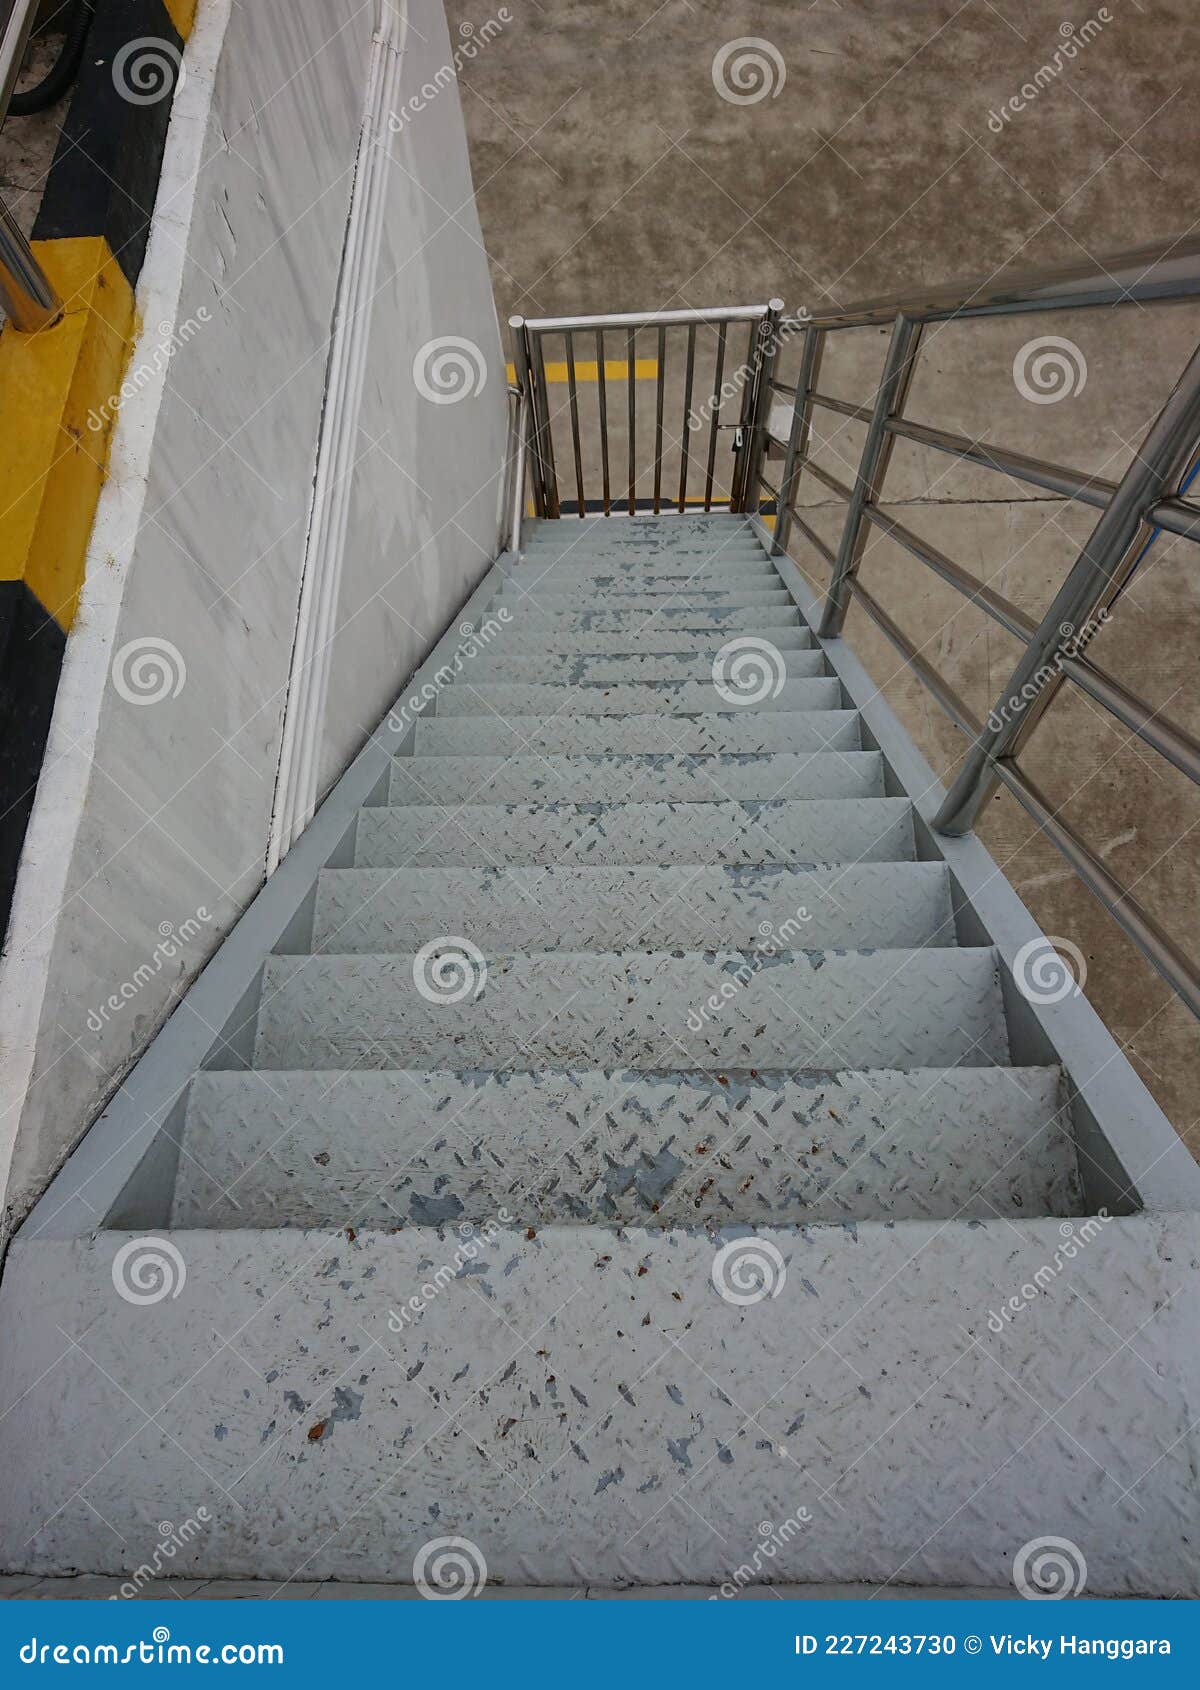 Descending Stairs Background Portrait Outdoor Stock Photo - Image of ...